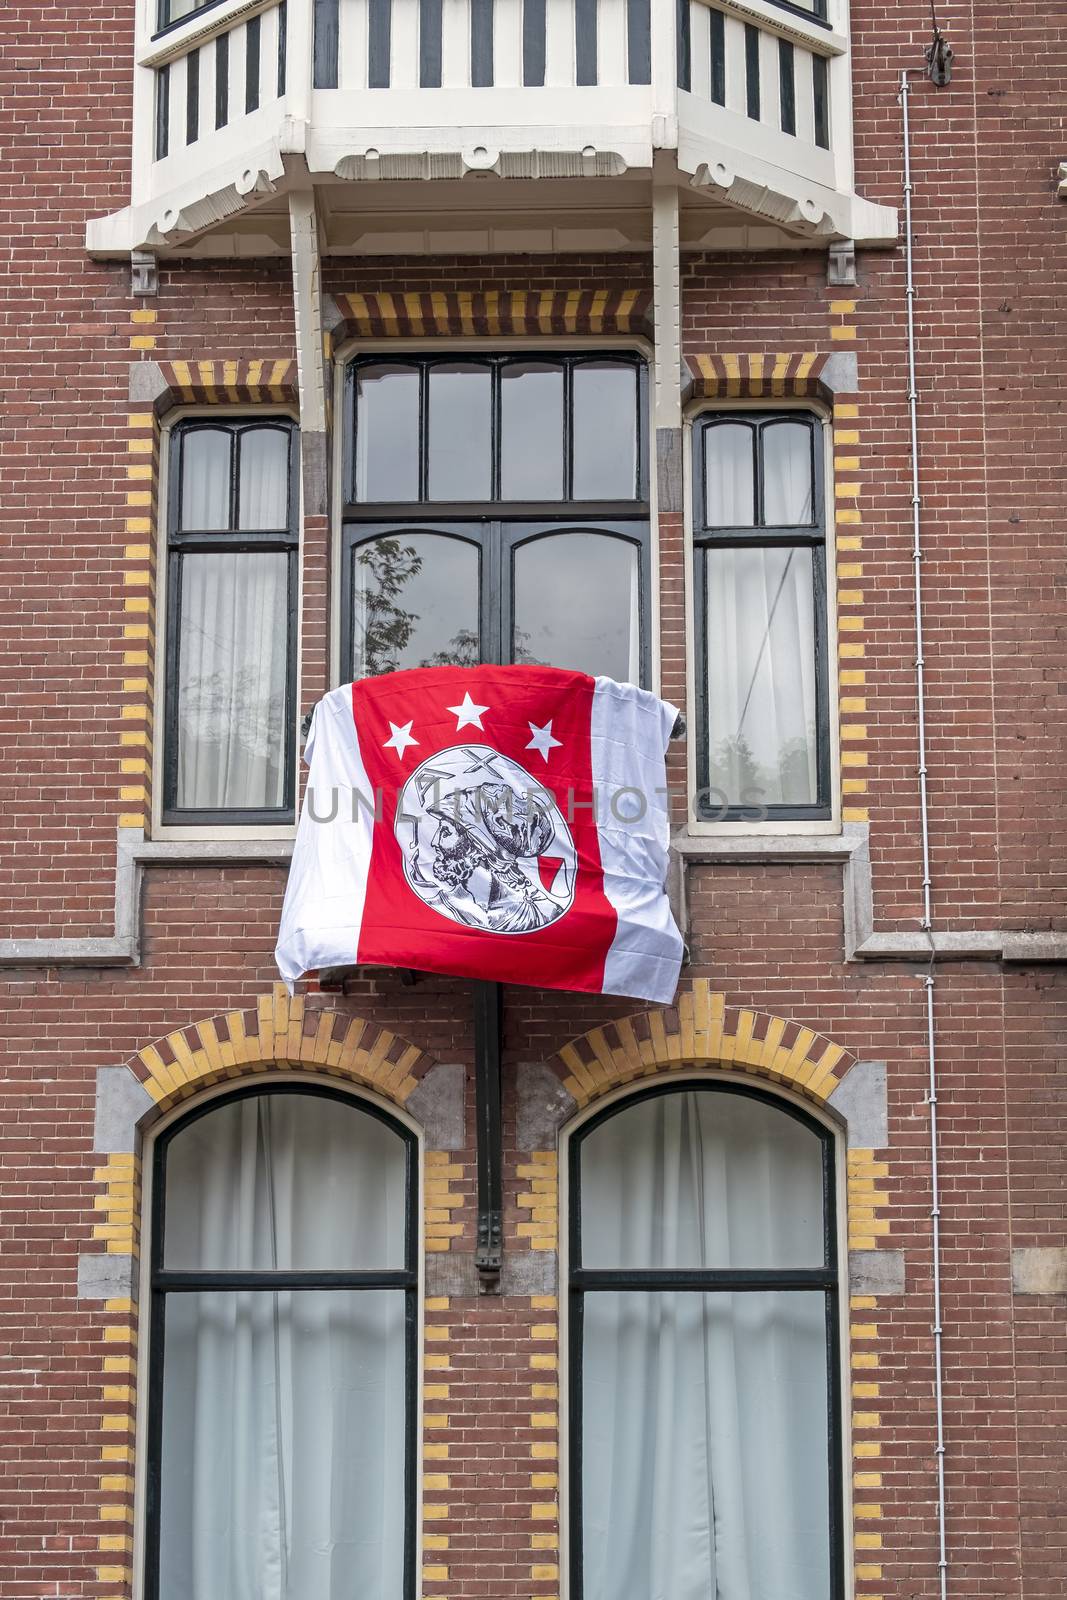 Dutch facade with the Ajax flag honoring the national championsh by devy